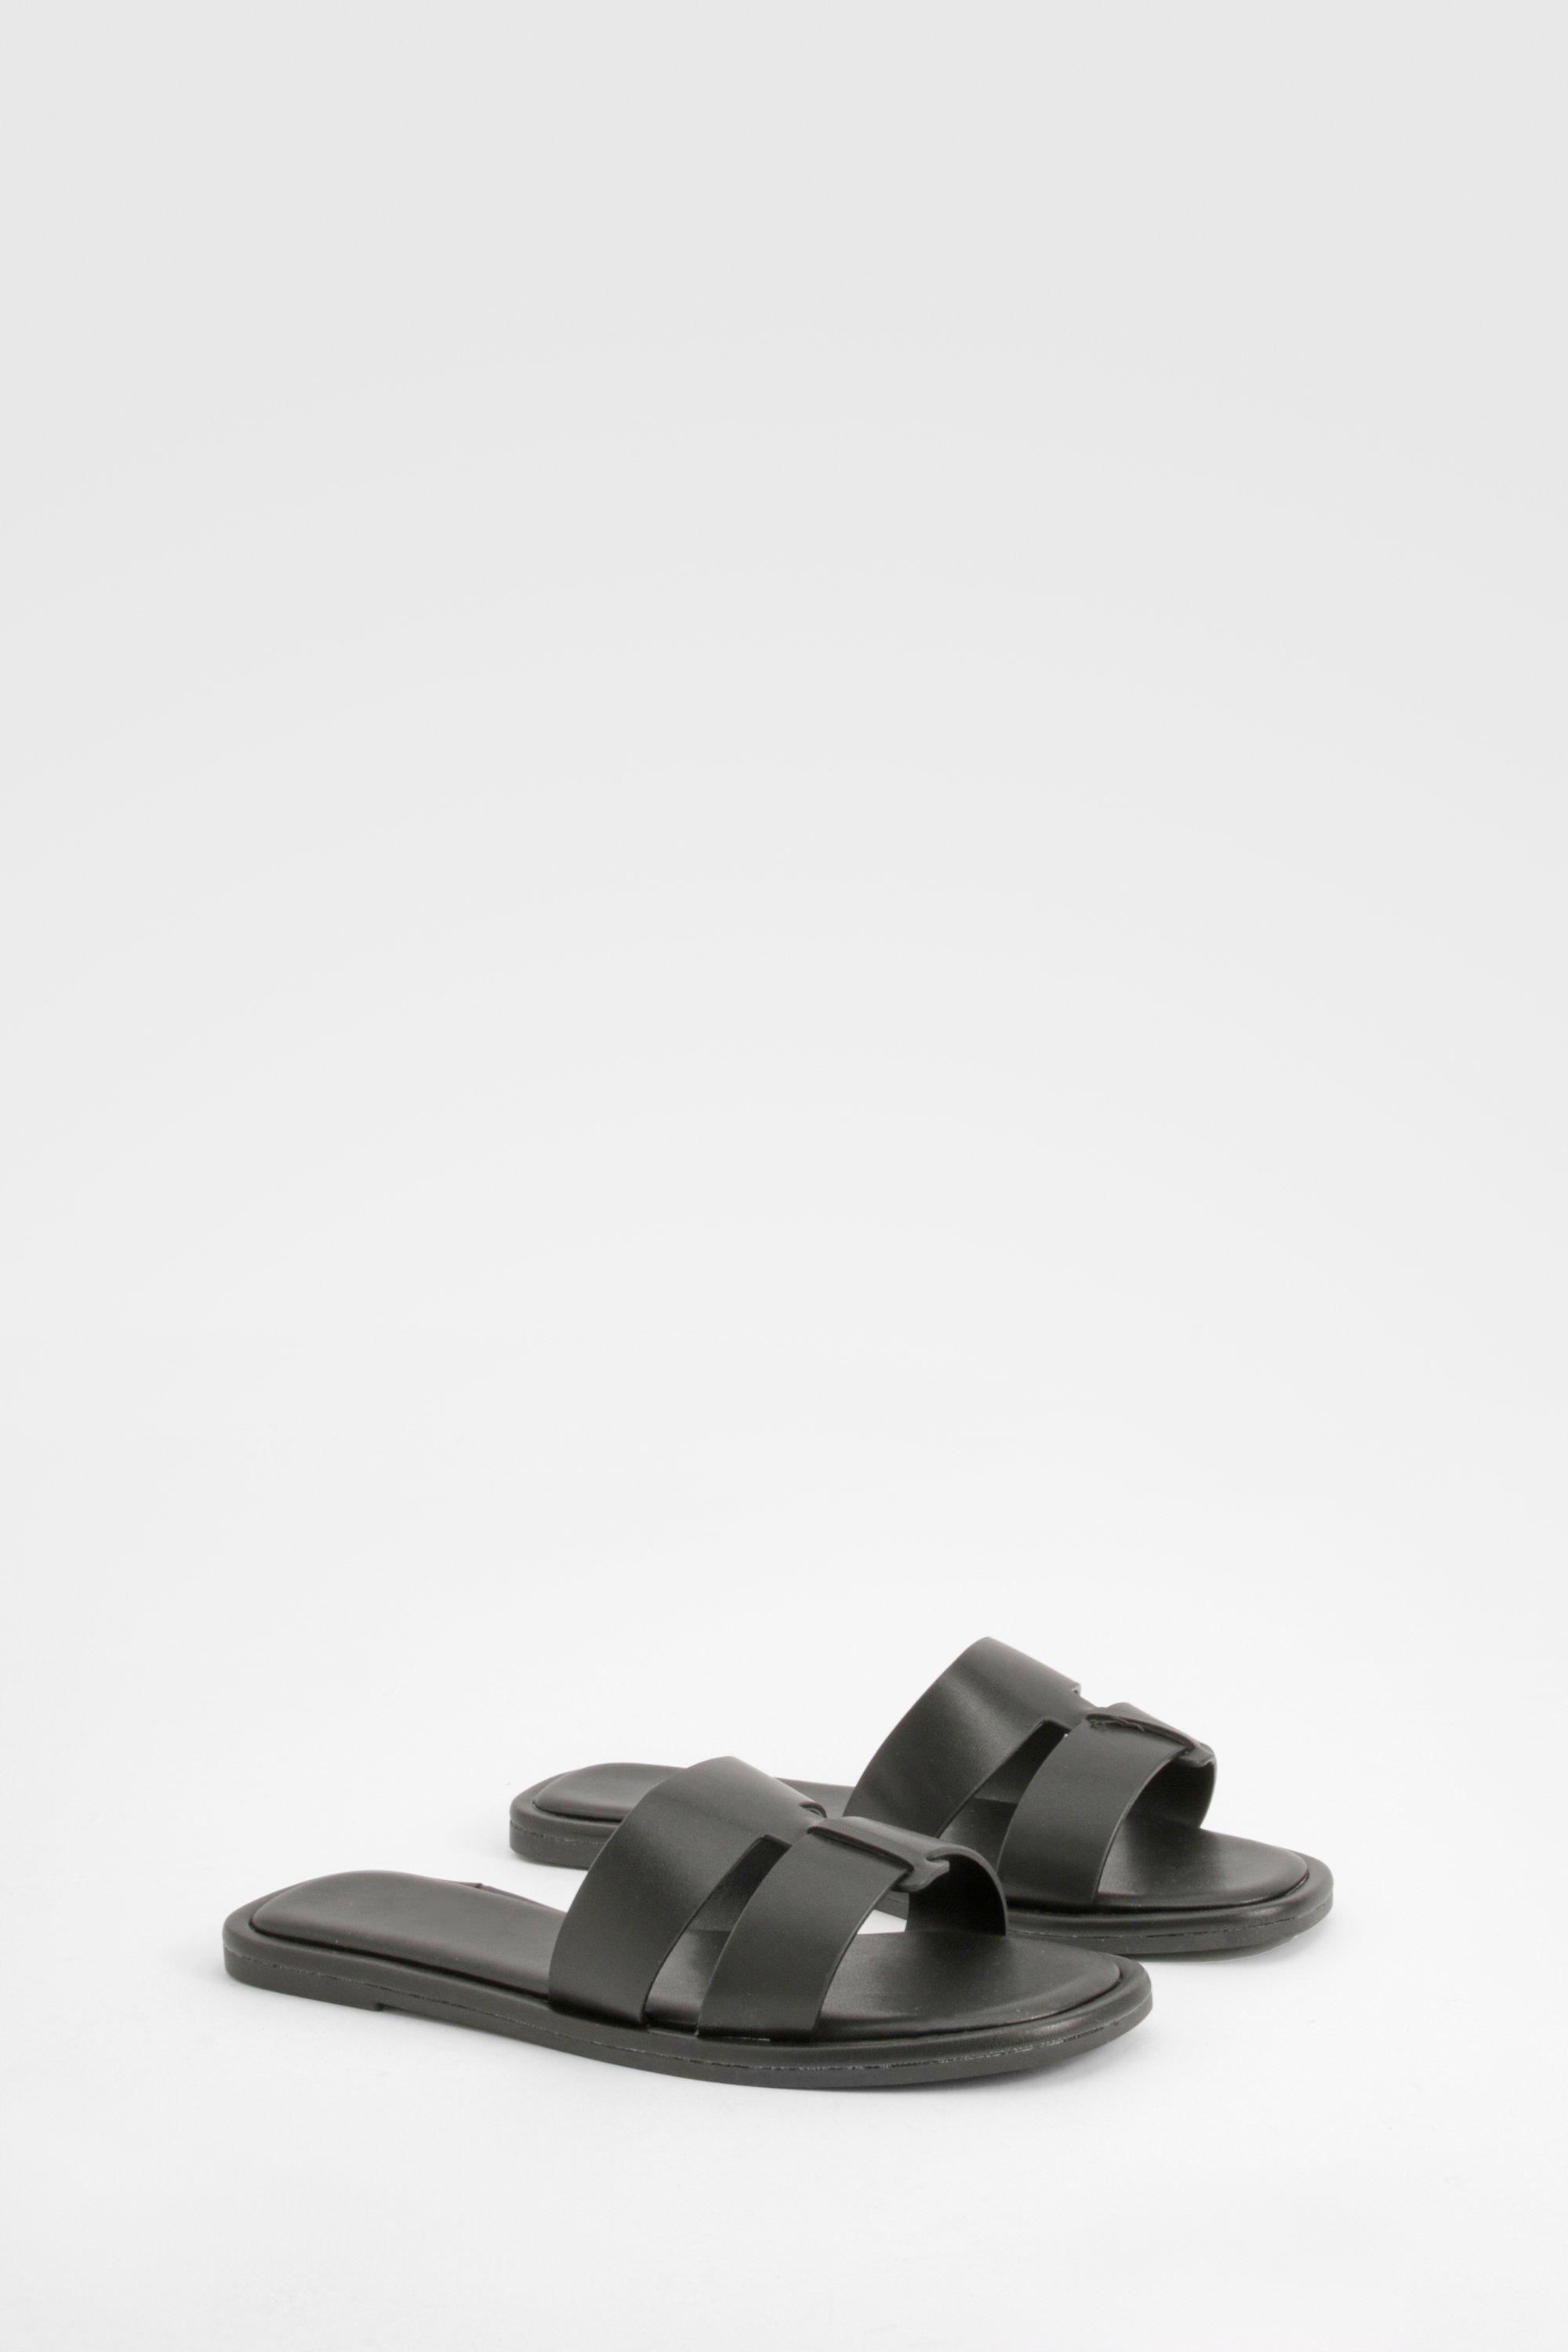 Image of Woven Mule Sandals, Nero